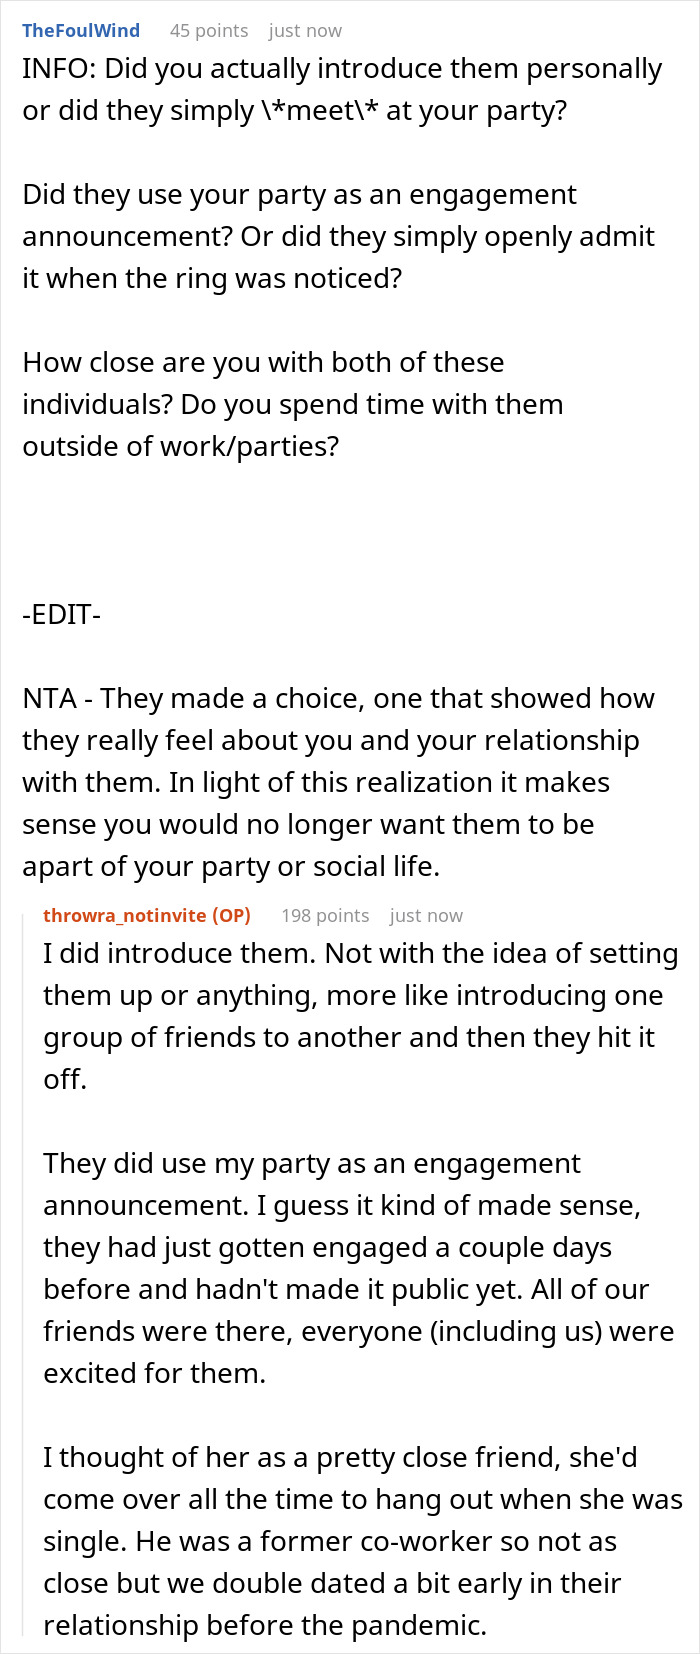 "AITA For Not Inviting Them To My Christmas Party After They Didn’t Invite Me To Their Wedding?"